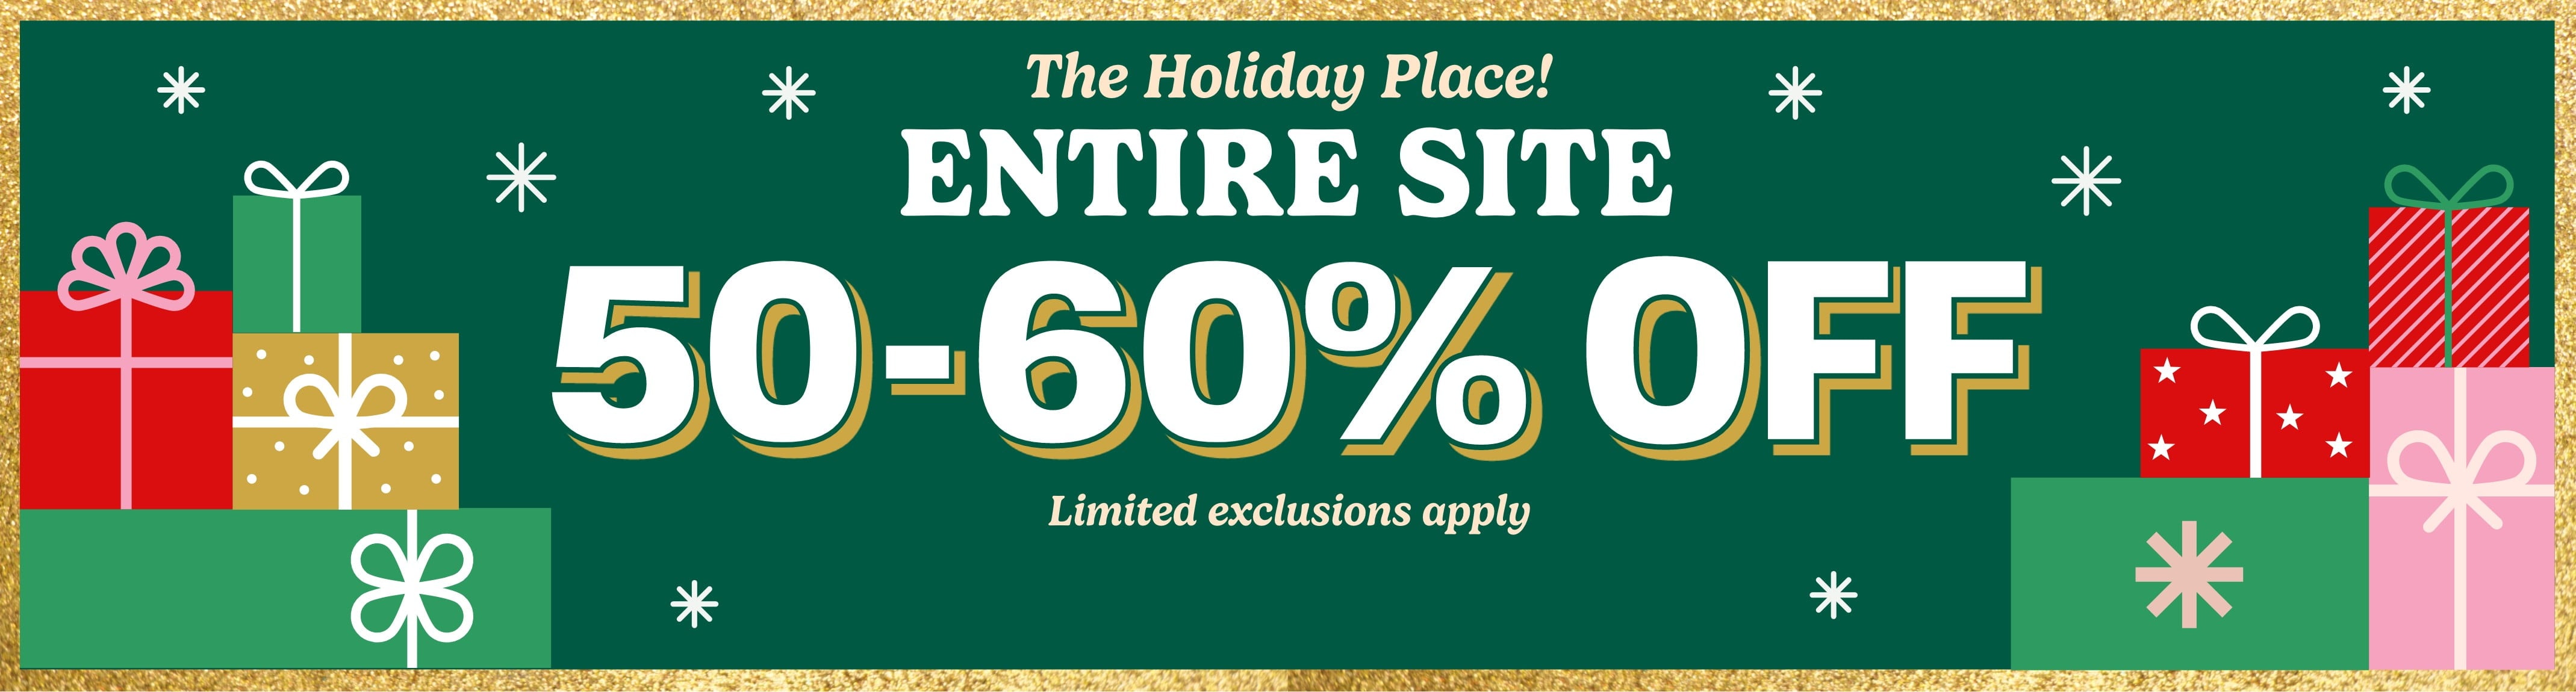 The Holiday Place! Entire Site 50-60% off Limited exclusions apply